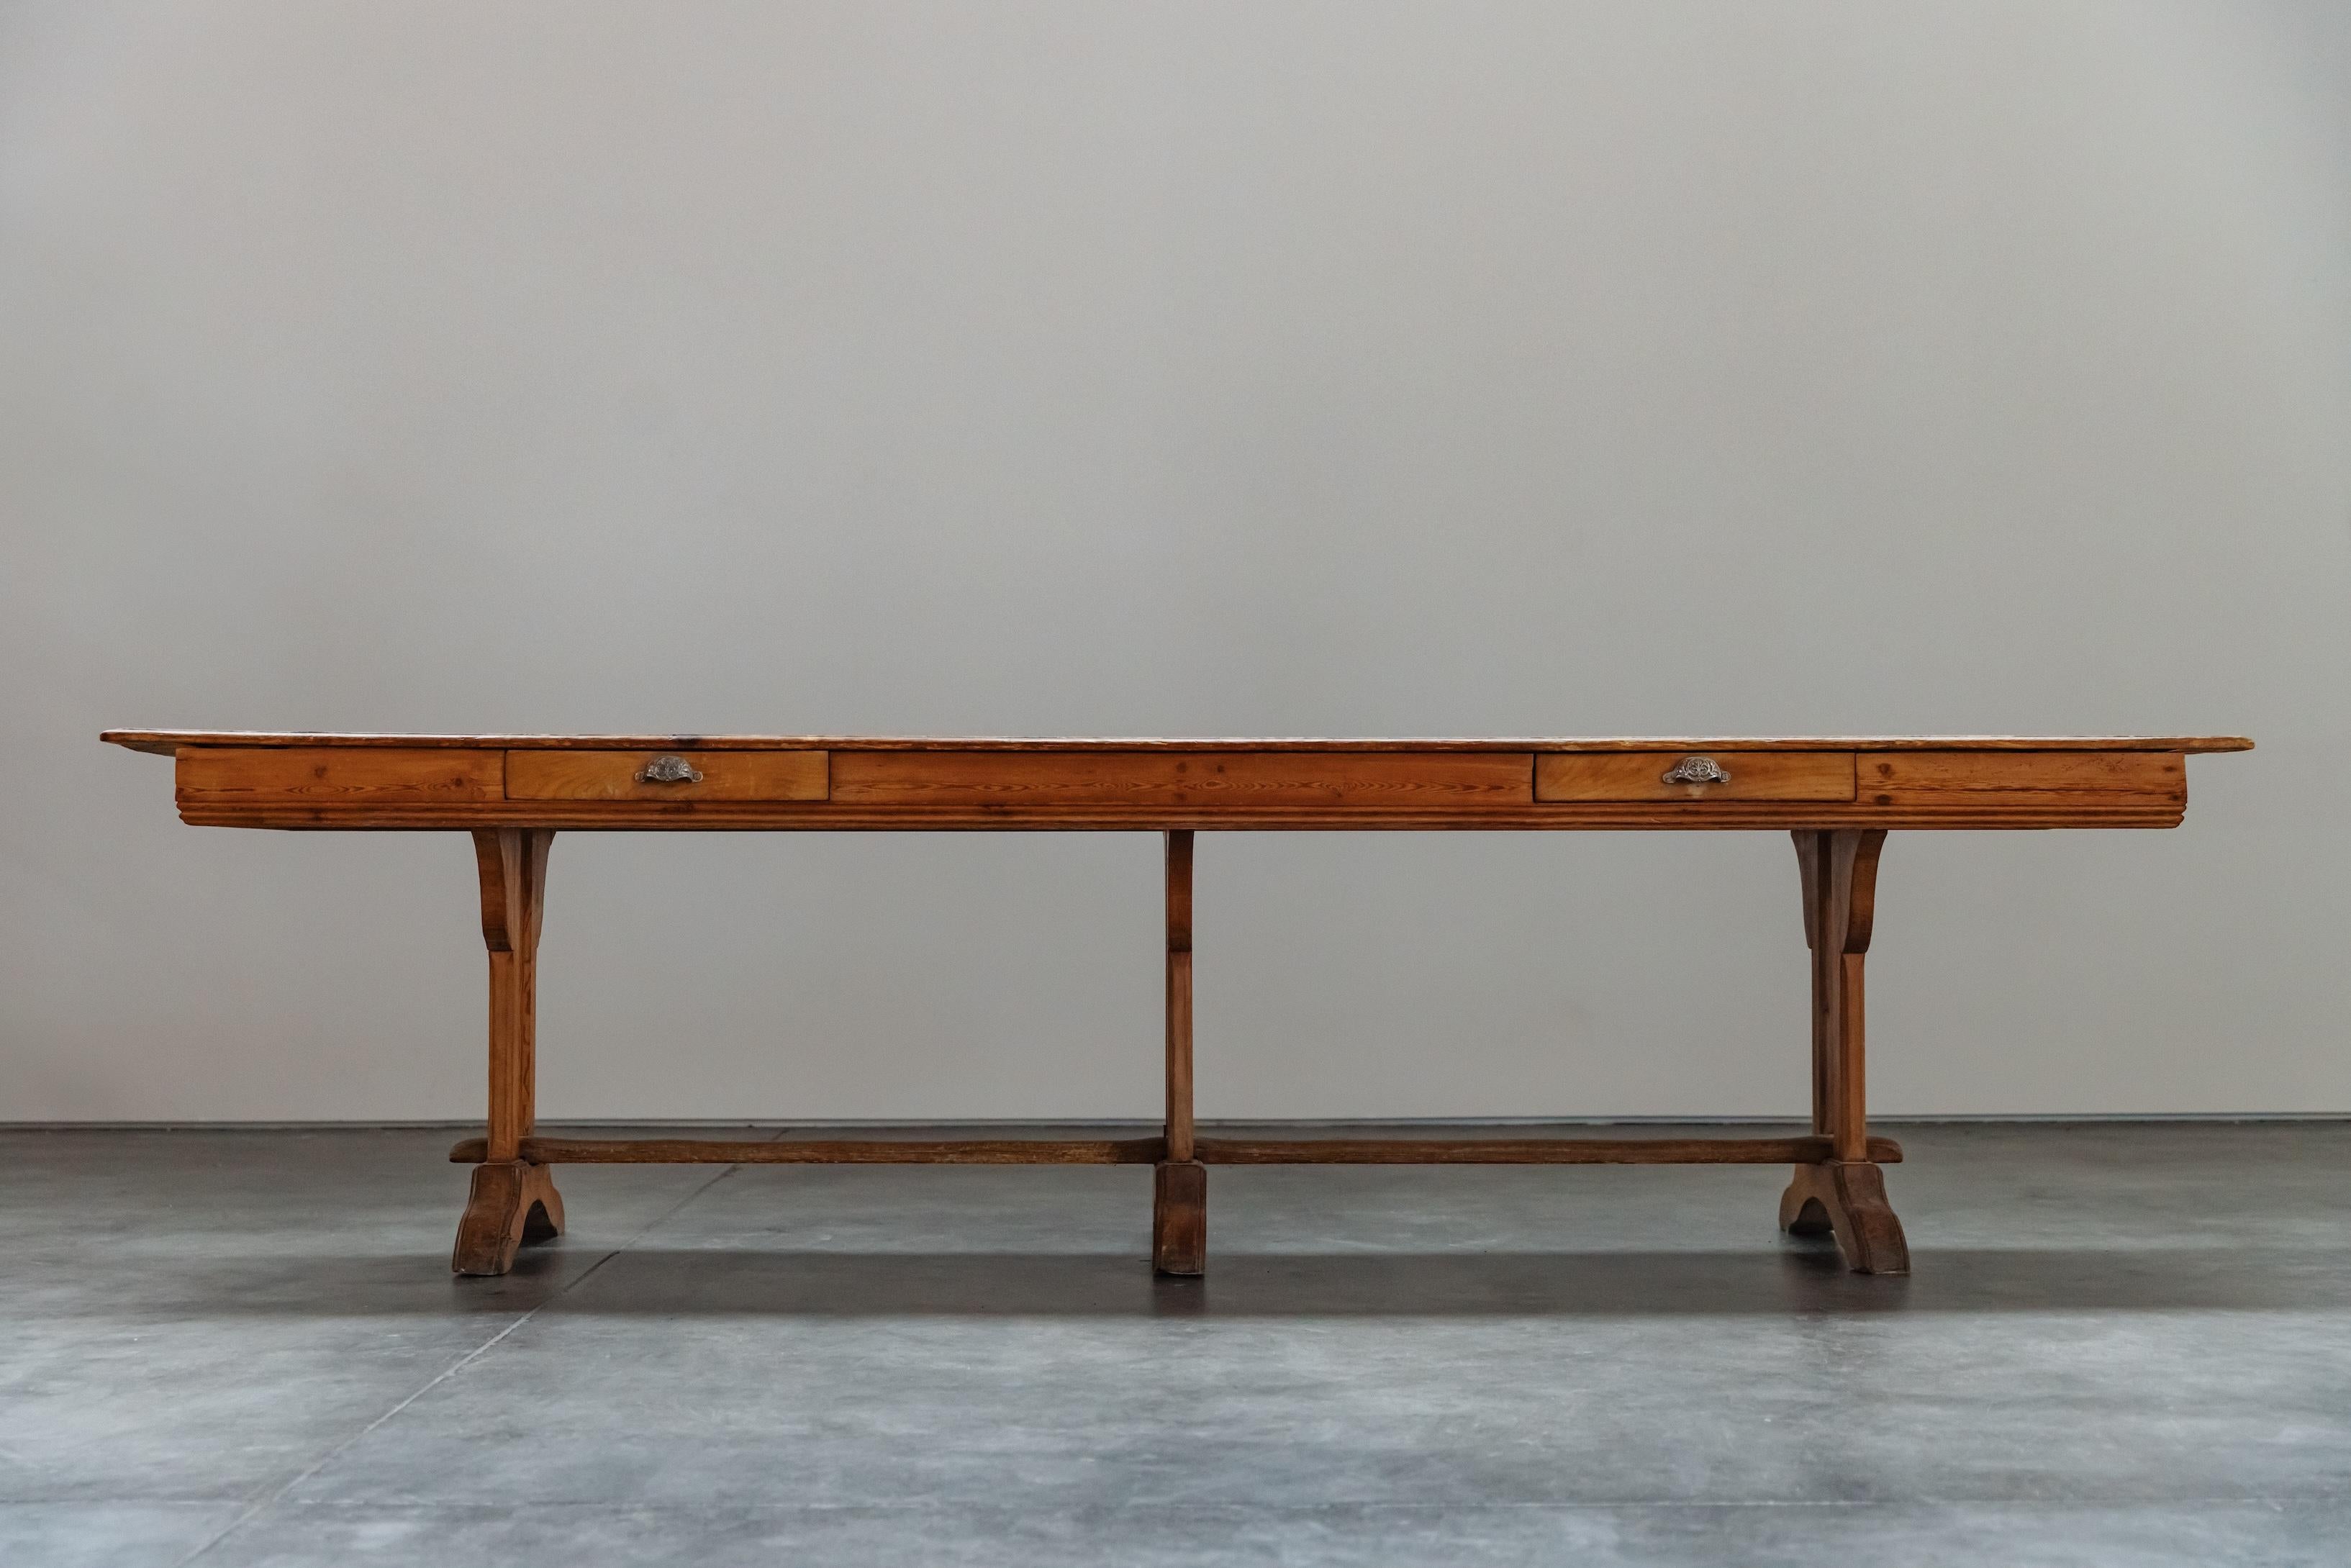 Vintage Pine Console Table From France, Circa 1940.  Solid pine construction with original hardware and great patina.  